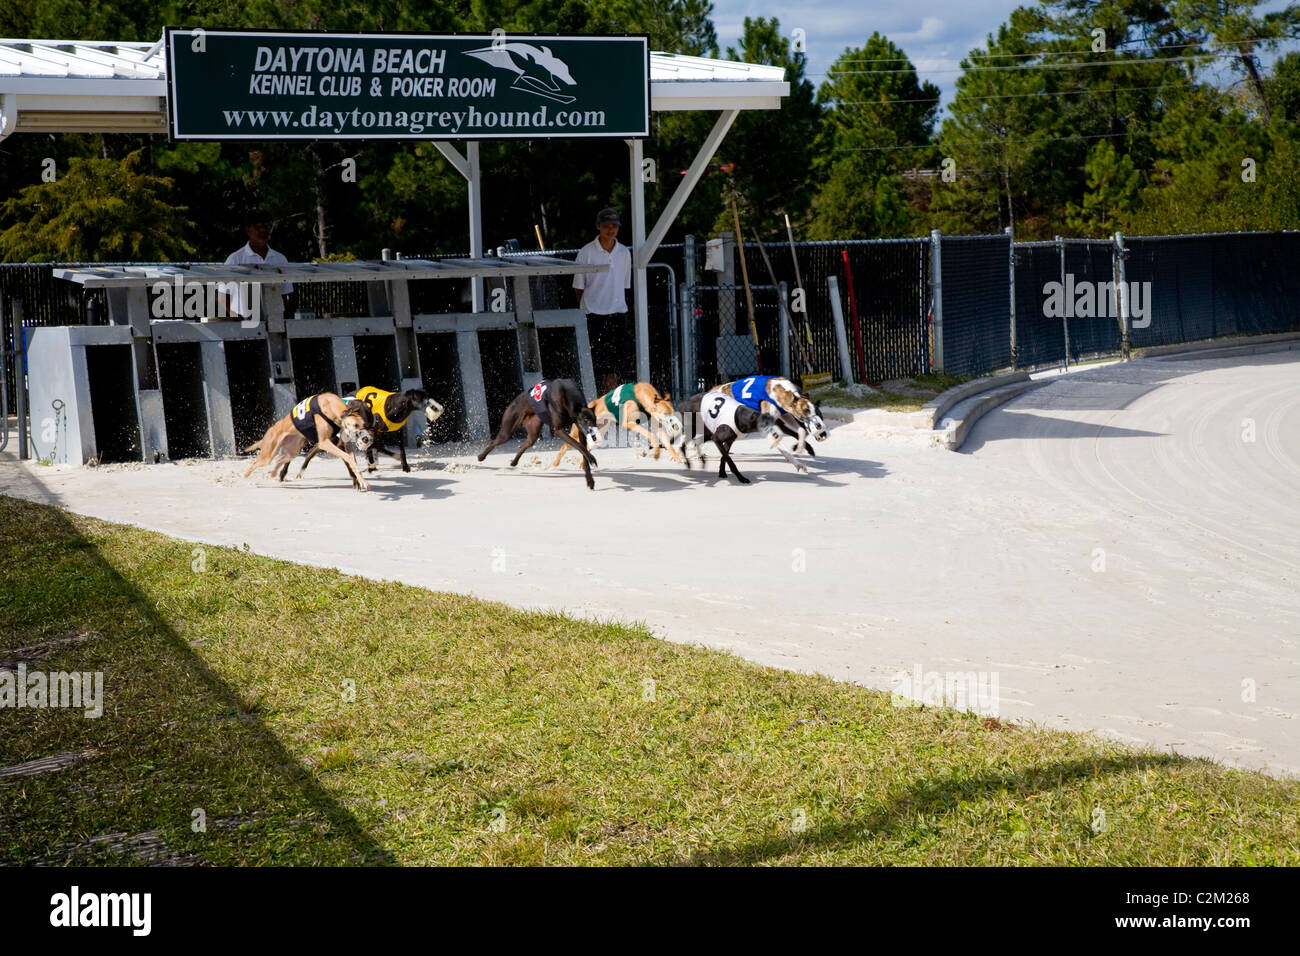 Daytona Beach Kennel Club offers greyhound racing action and a ...